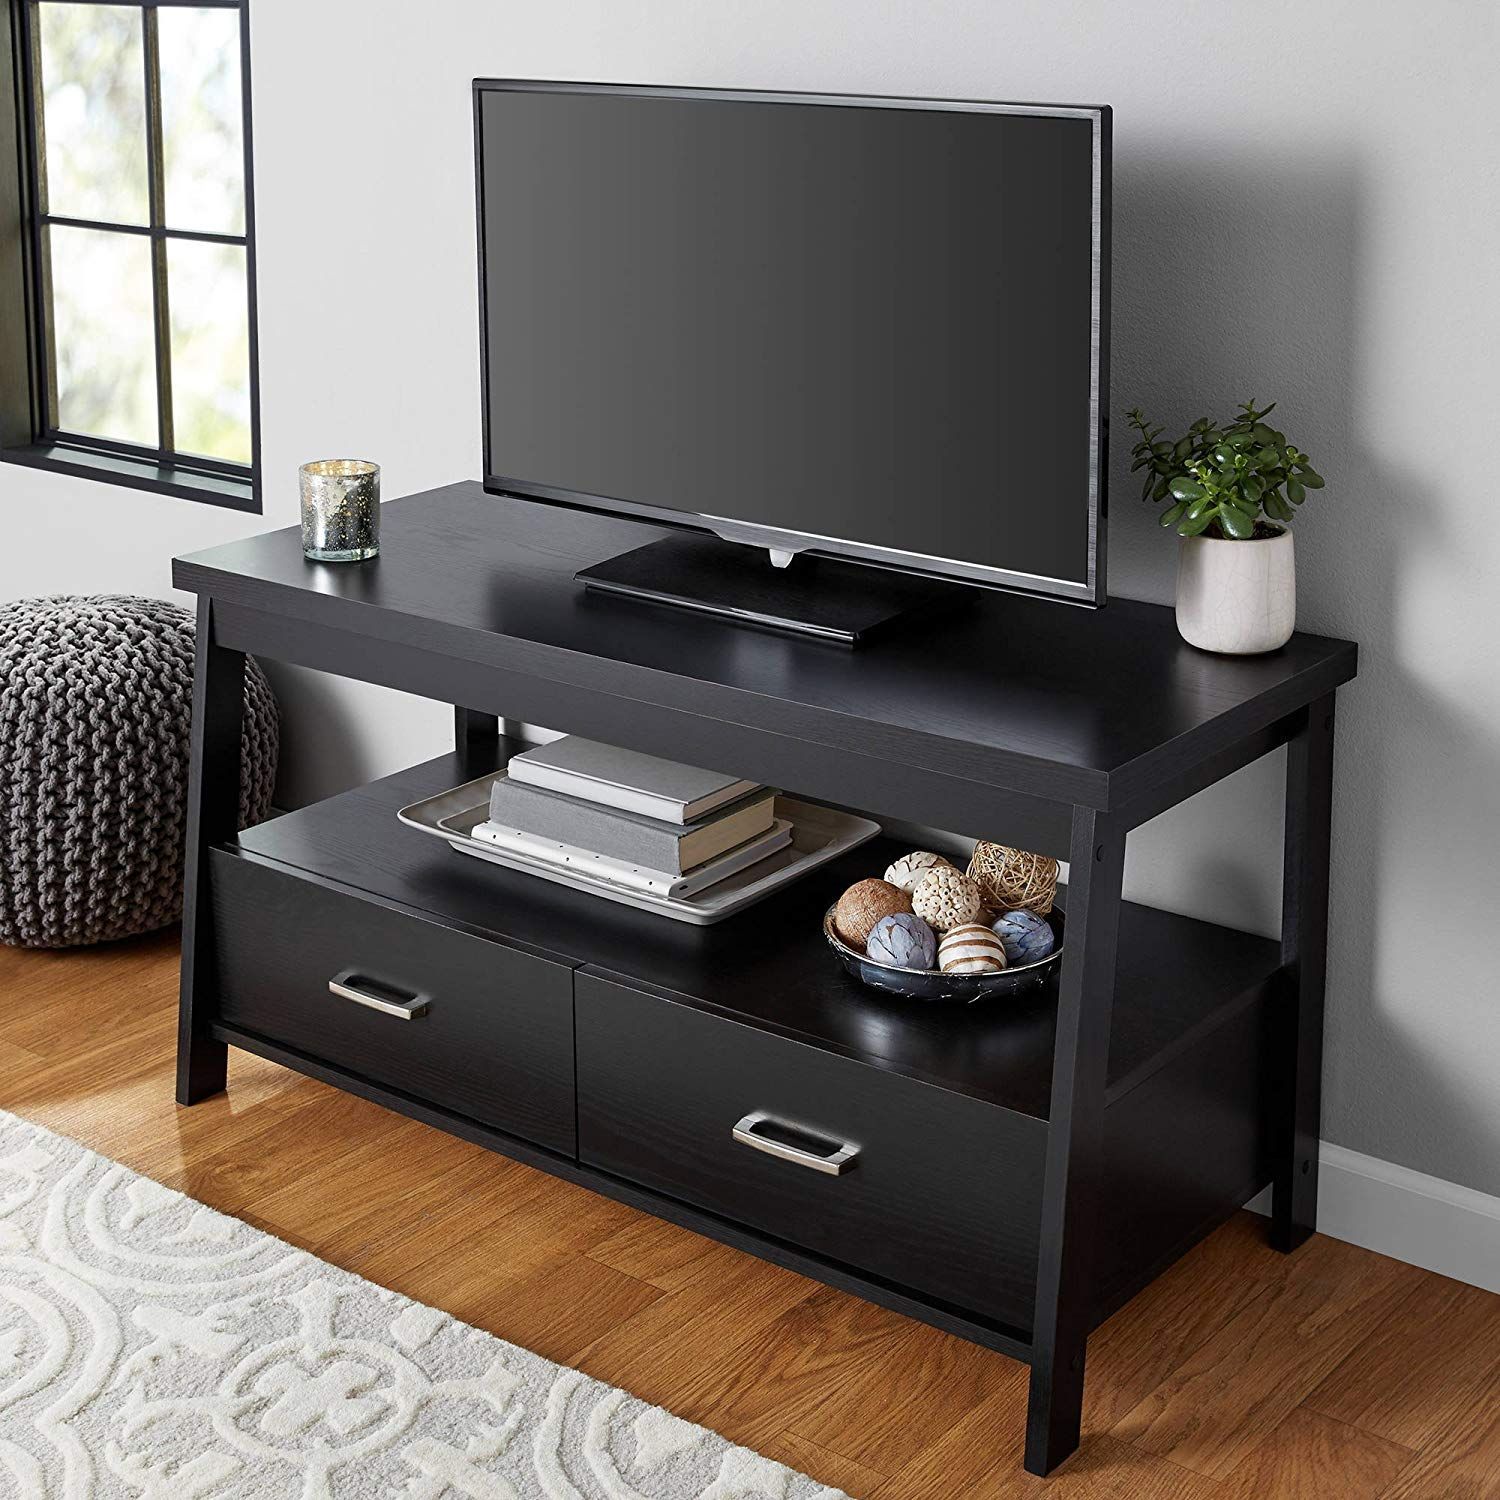 Mainstays Logan Tv Stand For Flat Screen Tvs Up To 47 And Inside Oak Tv Cabinets For Flat Screens (View 9 of 12)